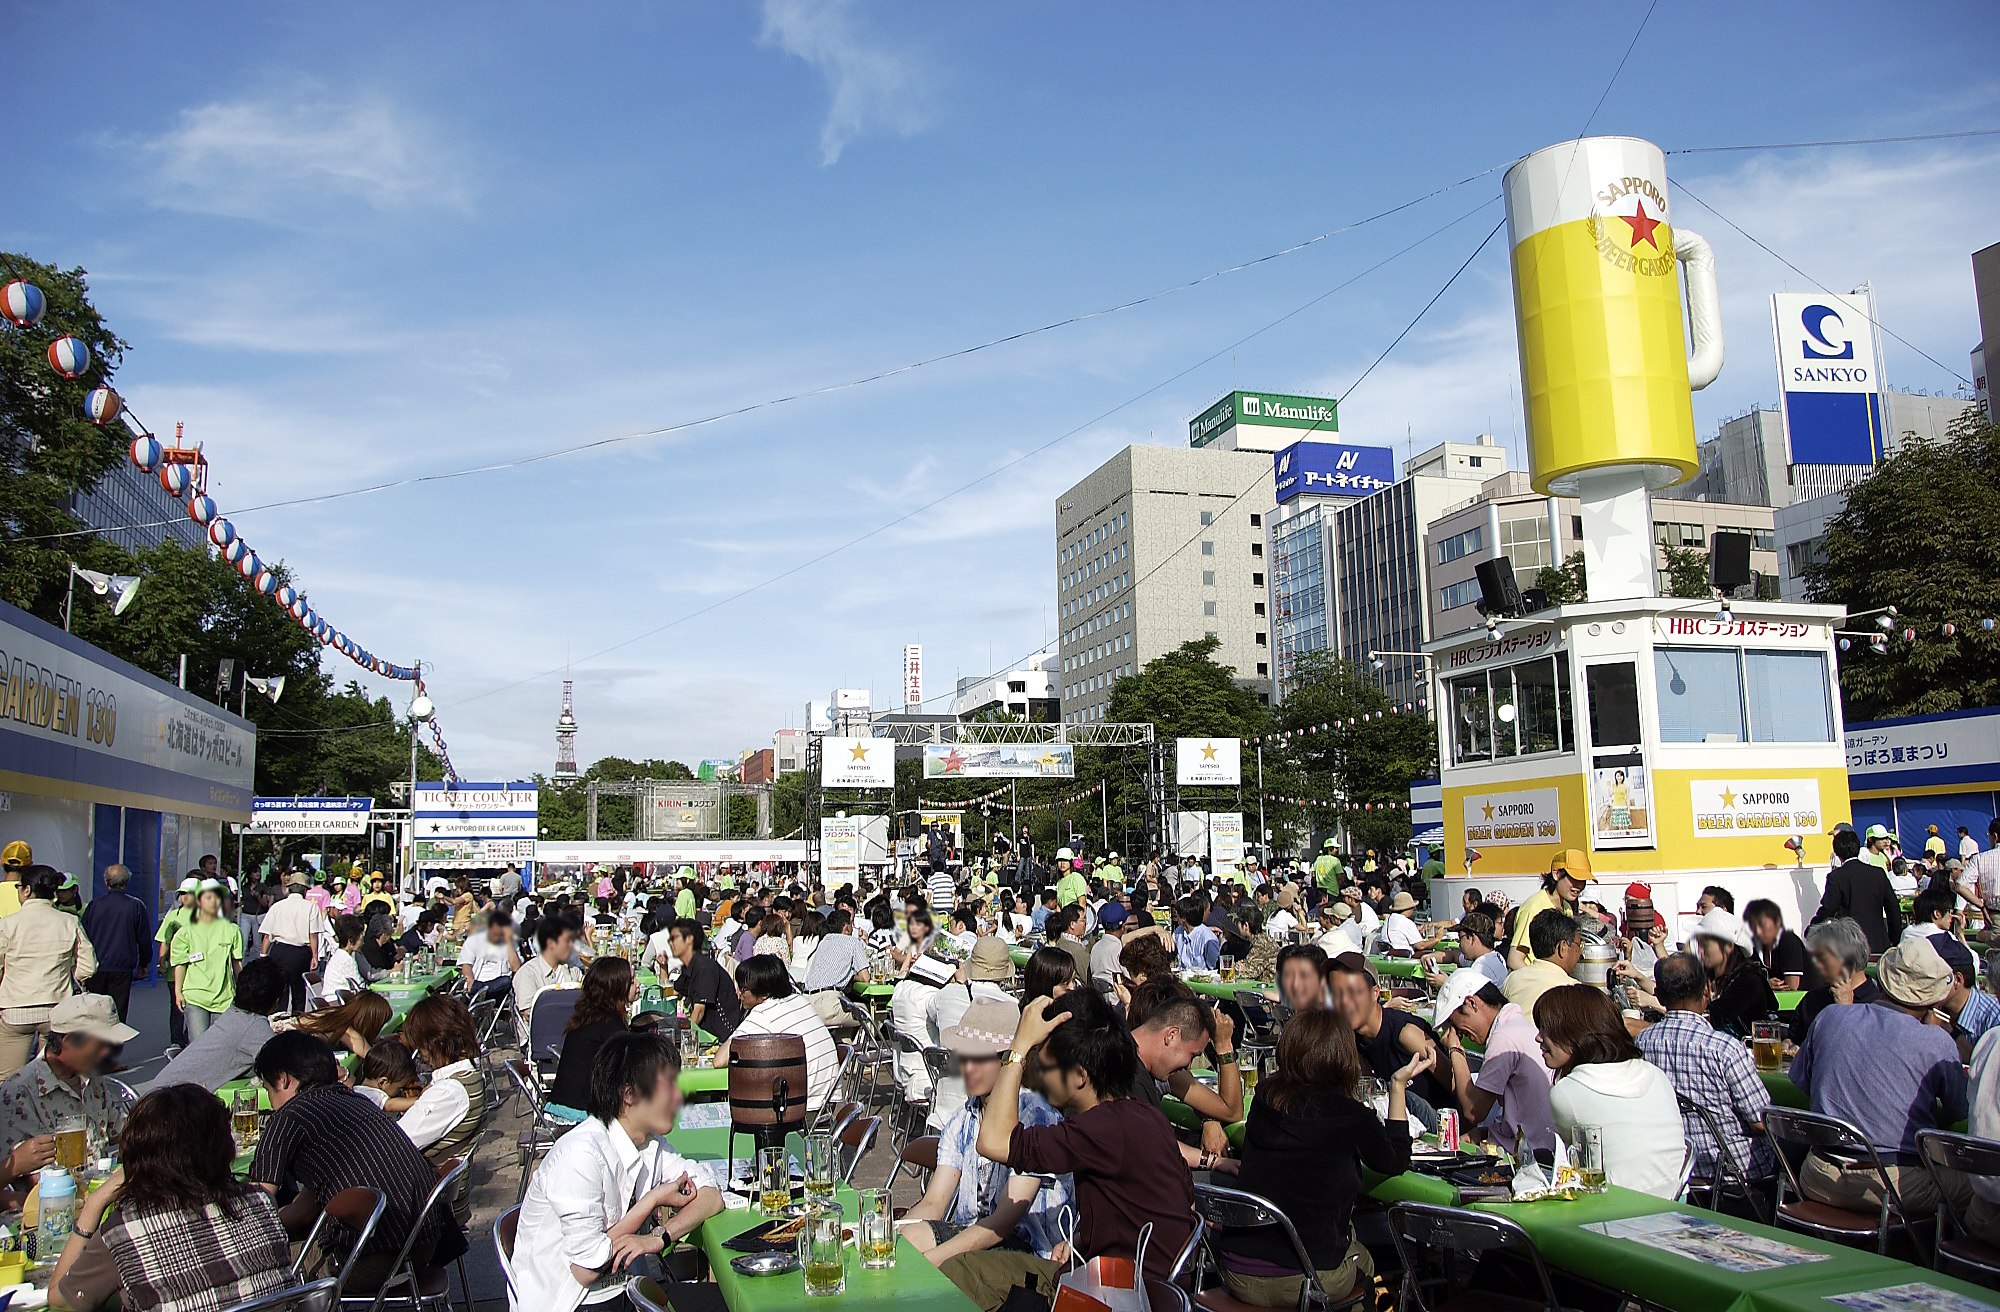 Stretching out for several streets, this is possibly the largest beer garden in Japan. 